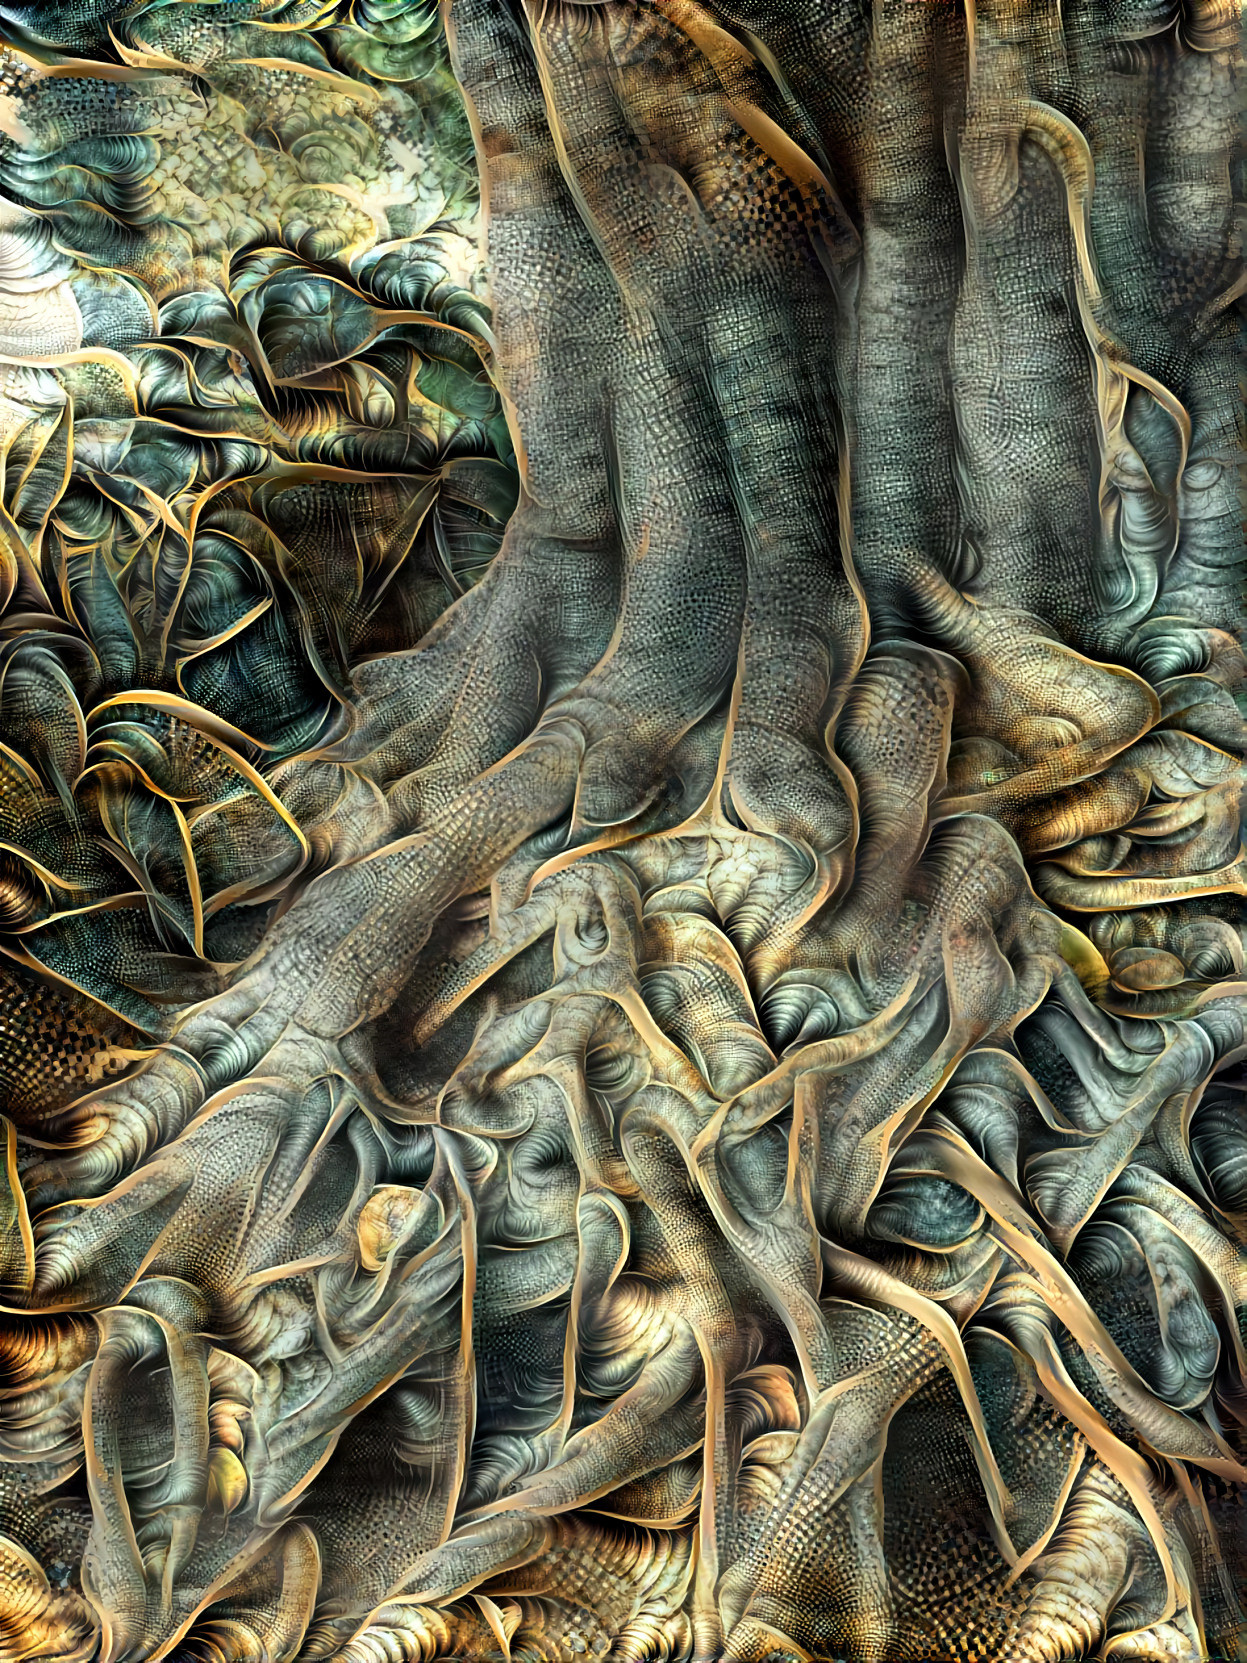 Gold and Silver Tree Roots